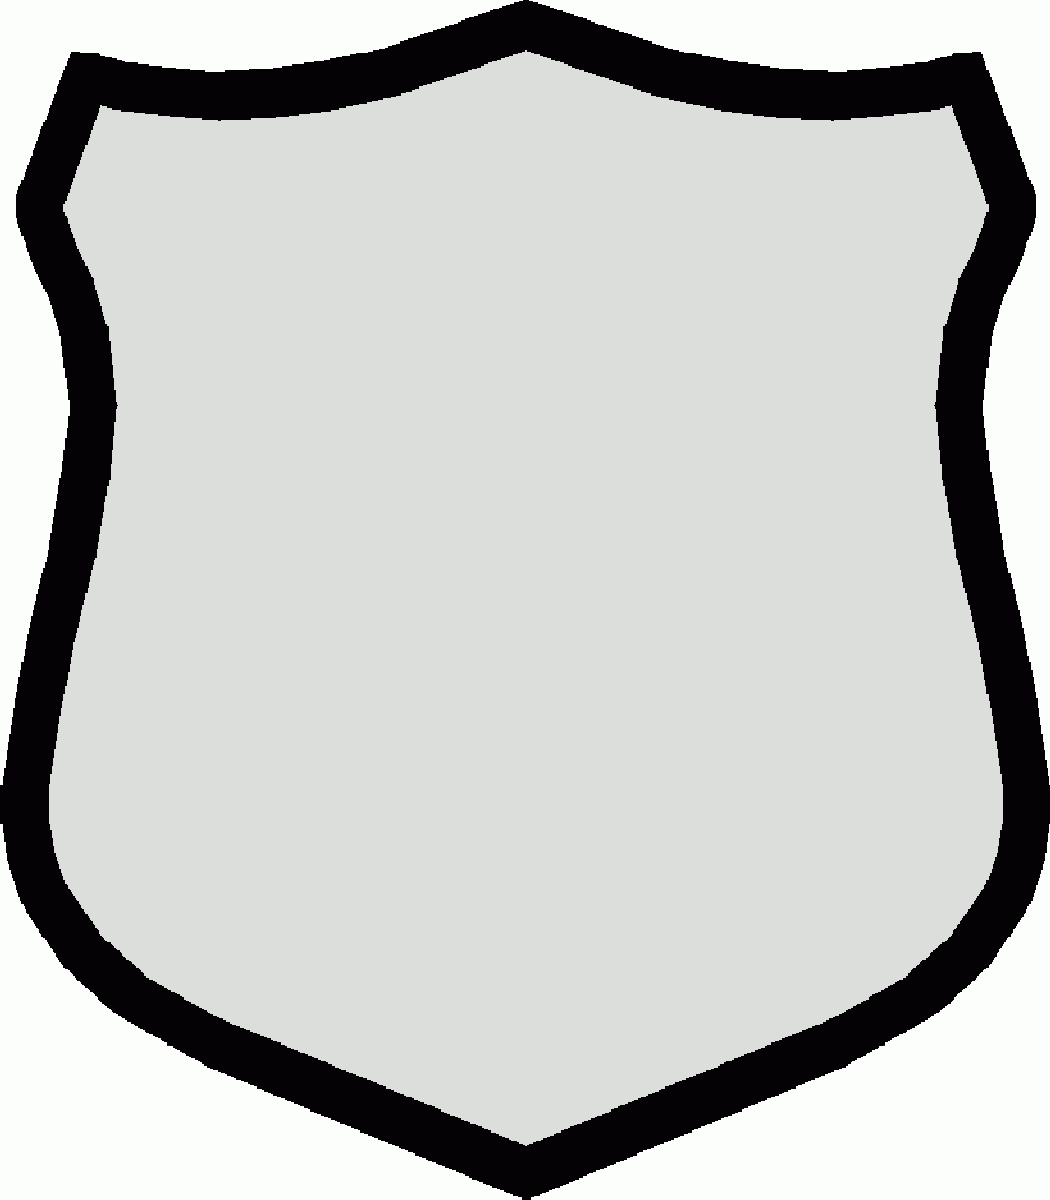 Shield Template Clipart | Free Download Best Shield Template Pertaining To Blank Shield Template Printable